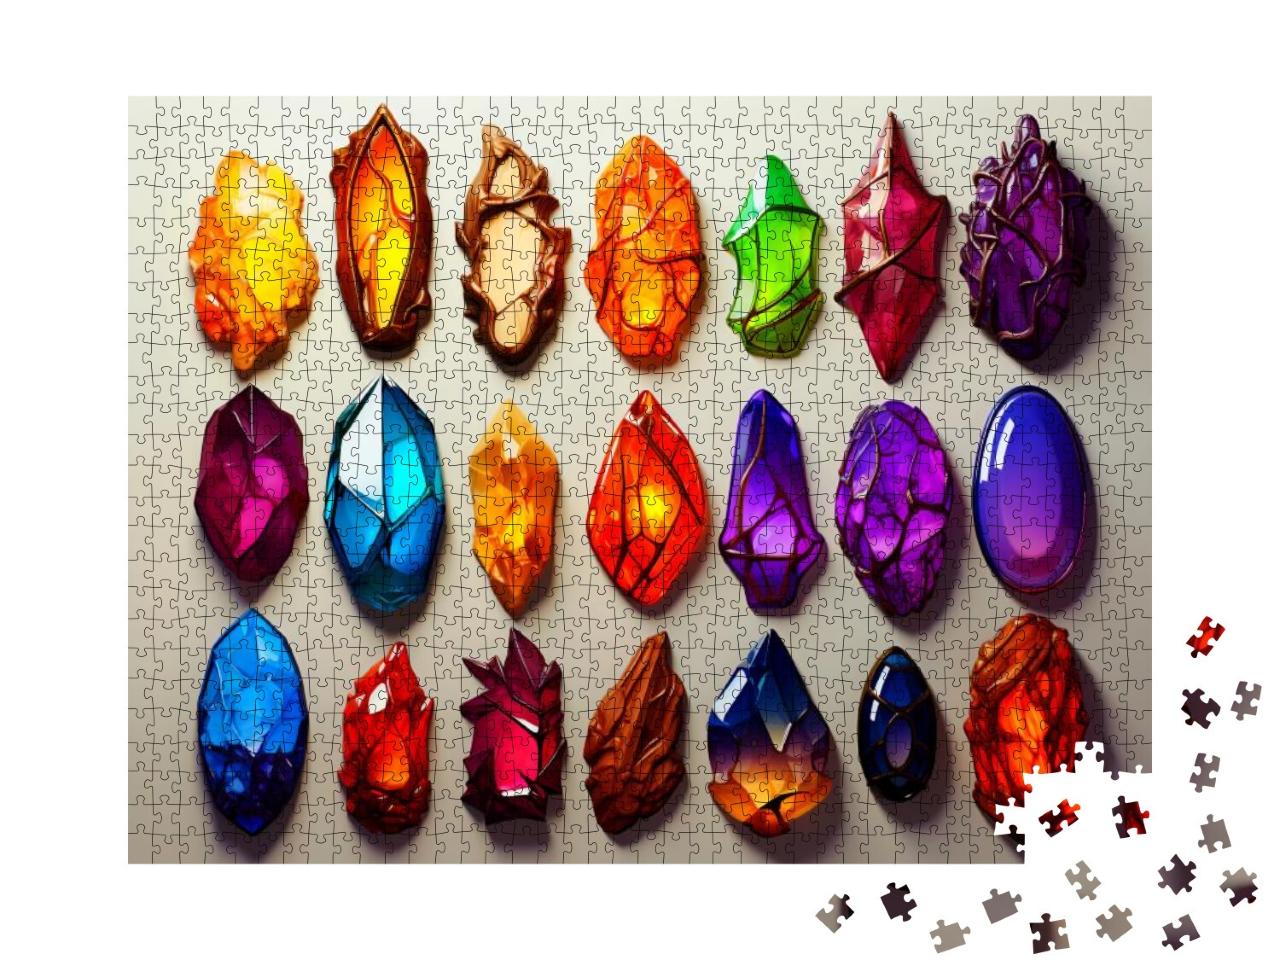 Magic Charms Jigsaw Puzzle with 1000 pieces